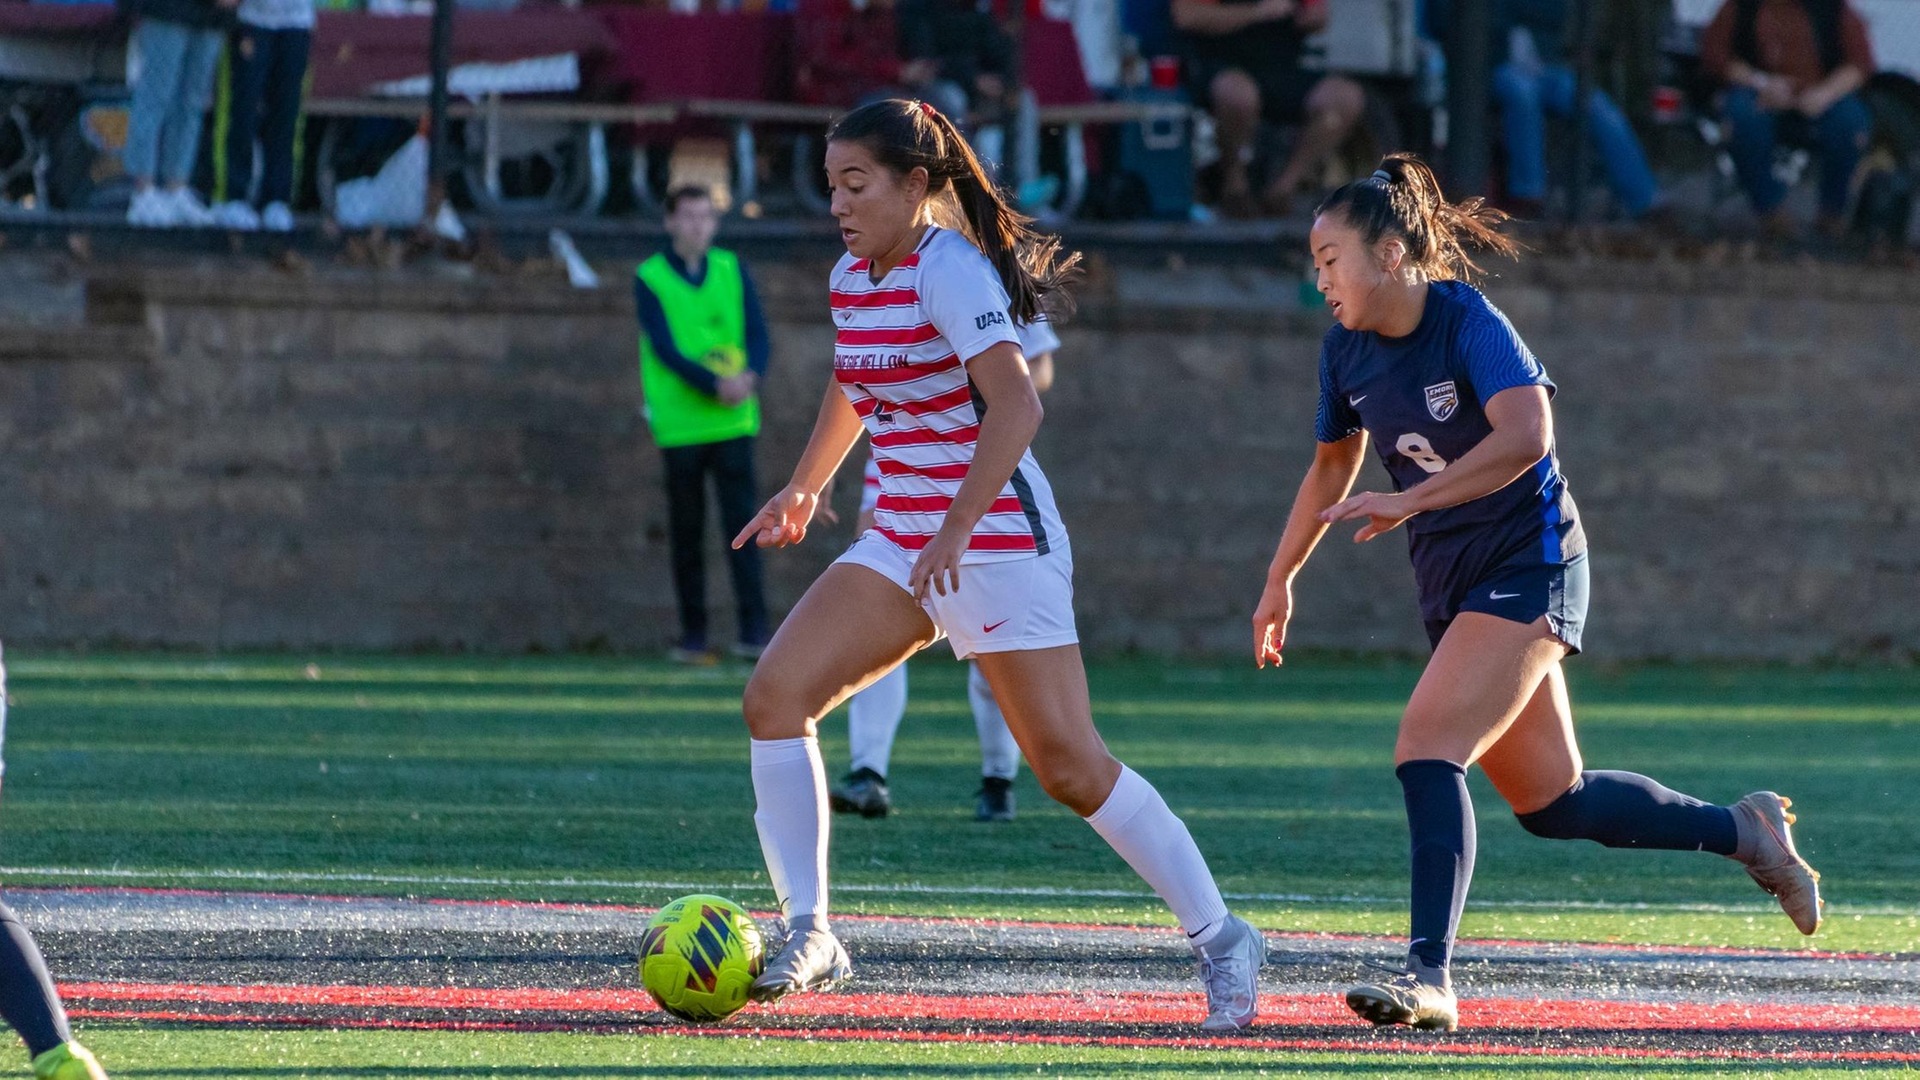 women's soccer player wearing a white and red striped jersey with white shorts dribbles by a defender wearing a blue uniform